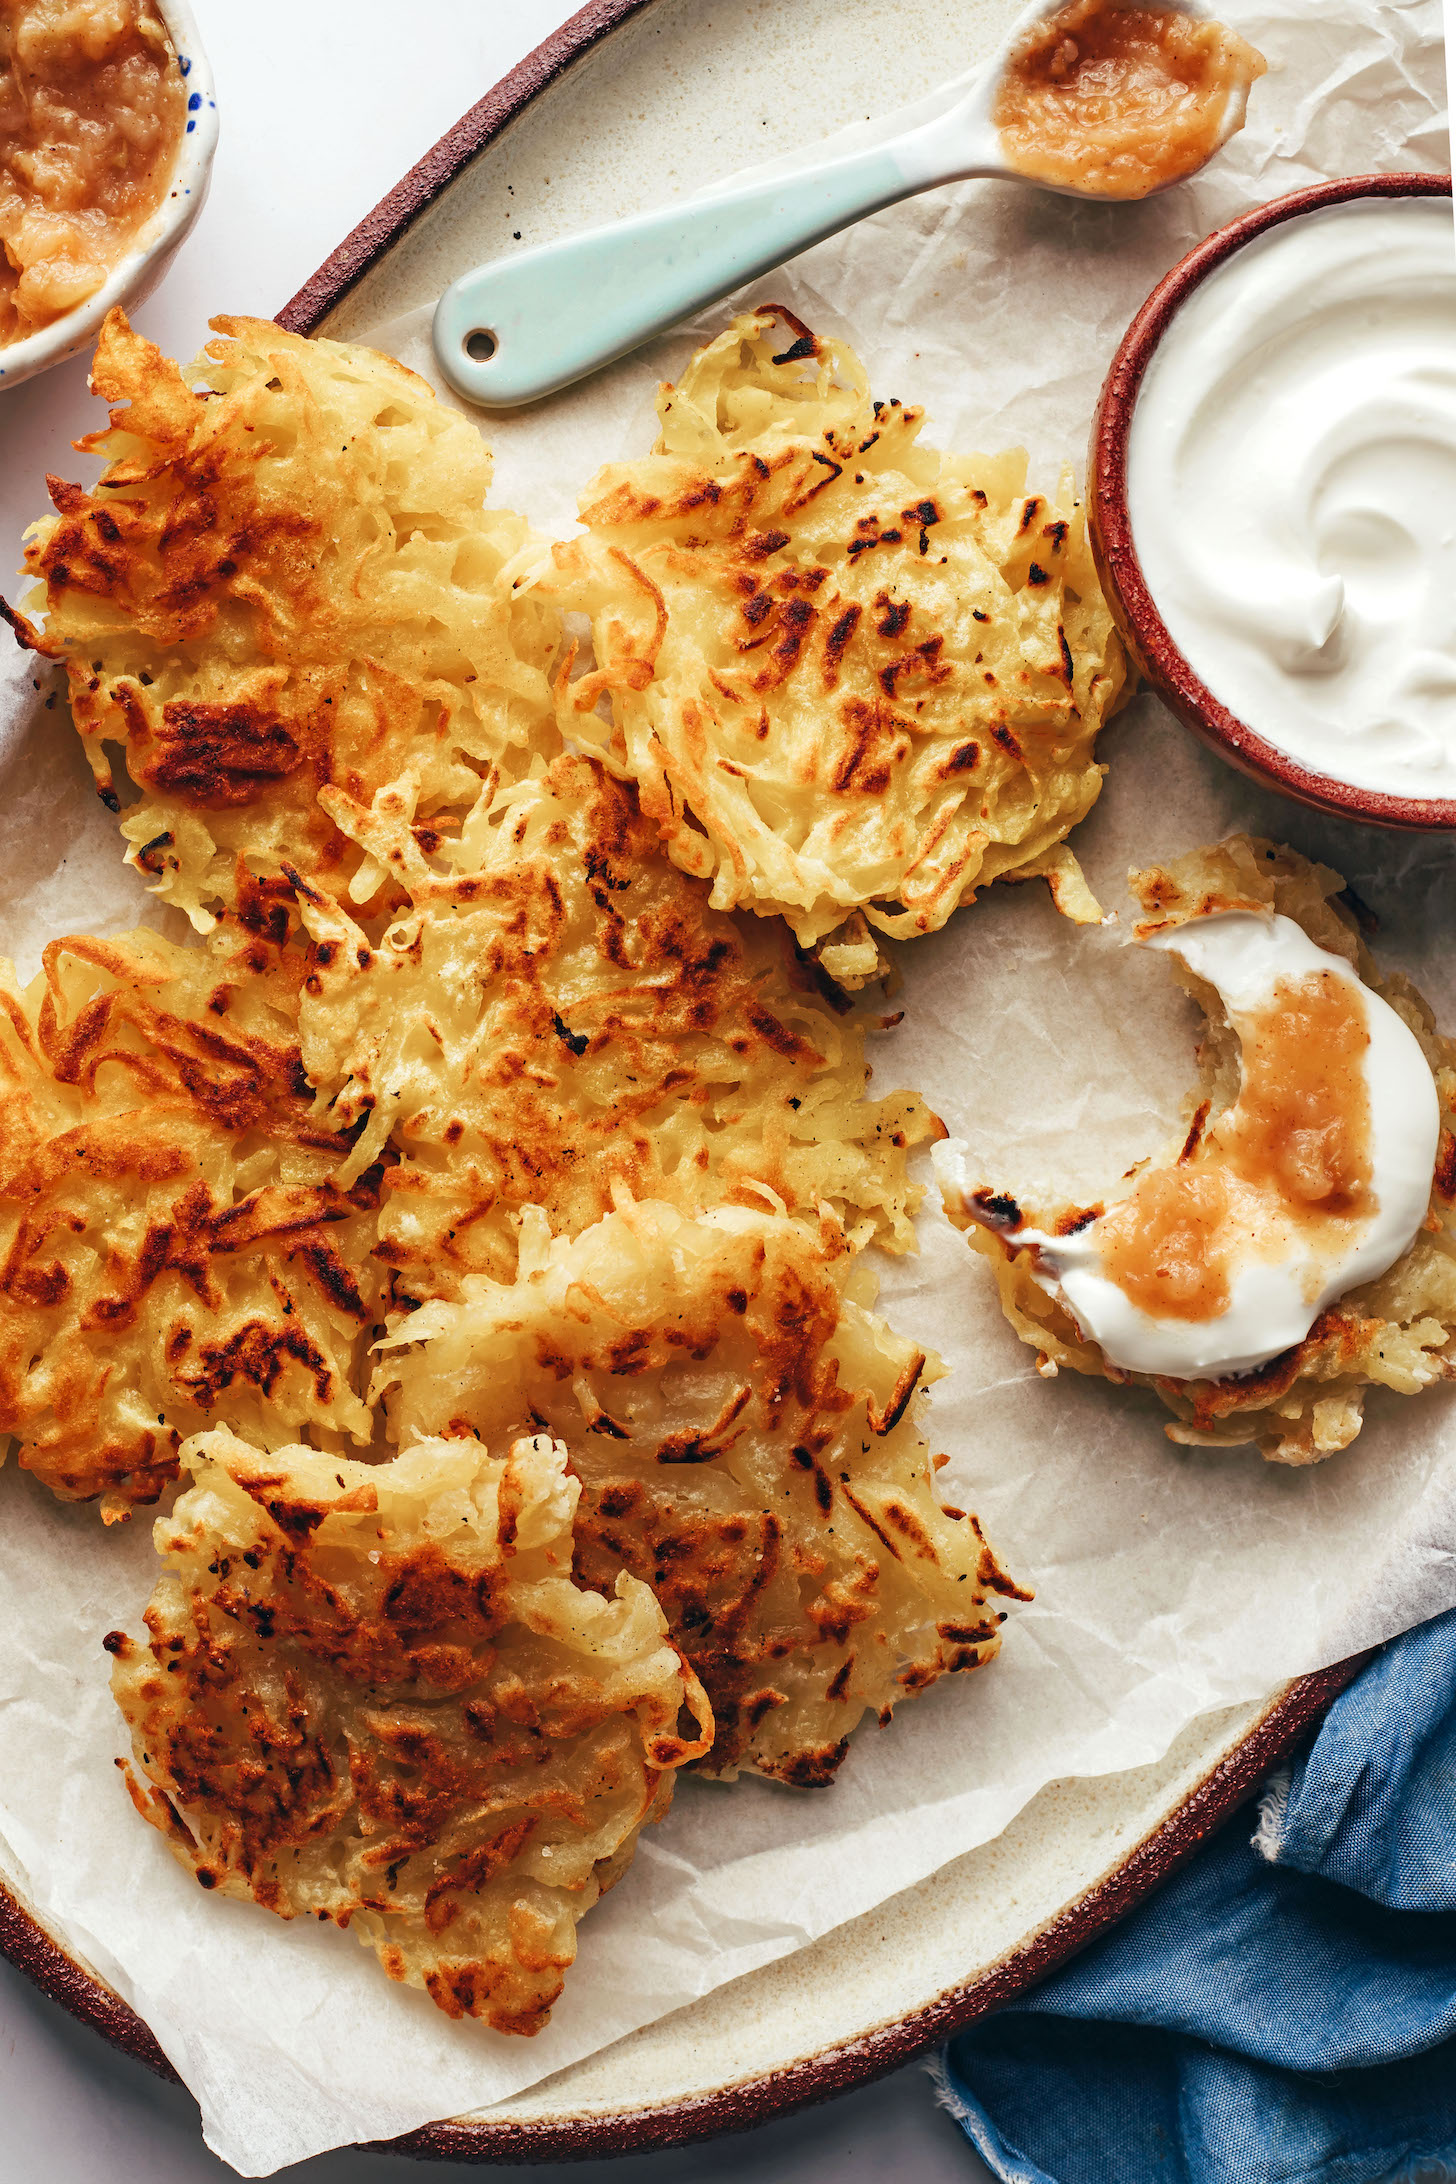 Plate of latkes with vegan sour cream and applesauce